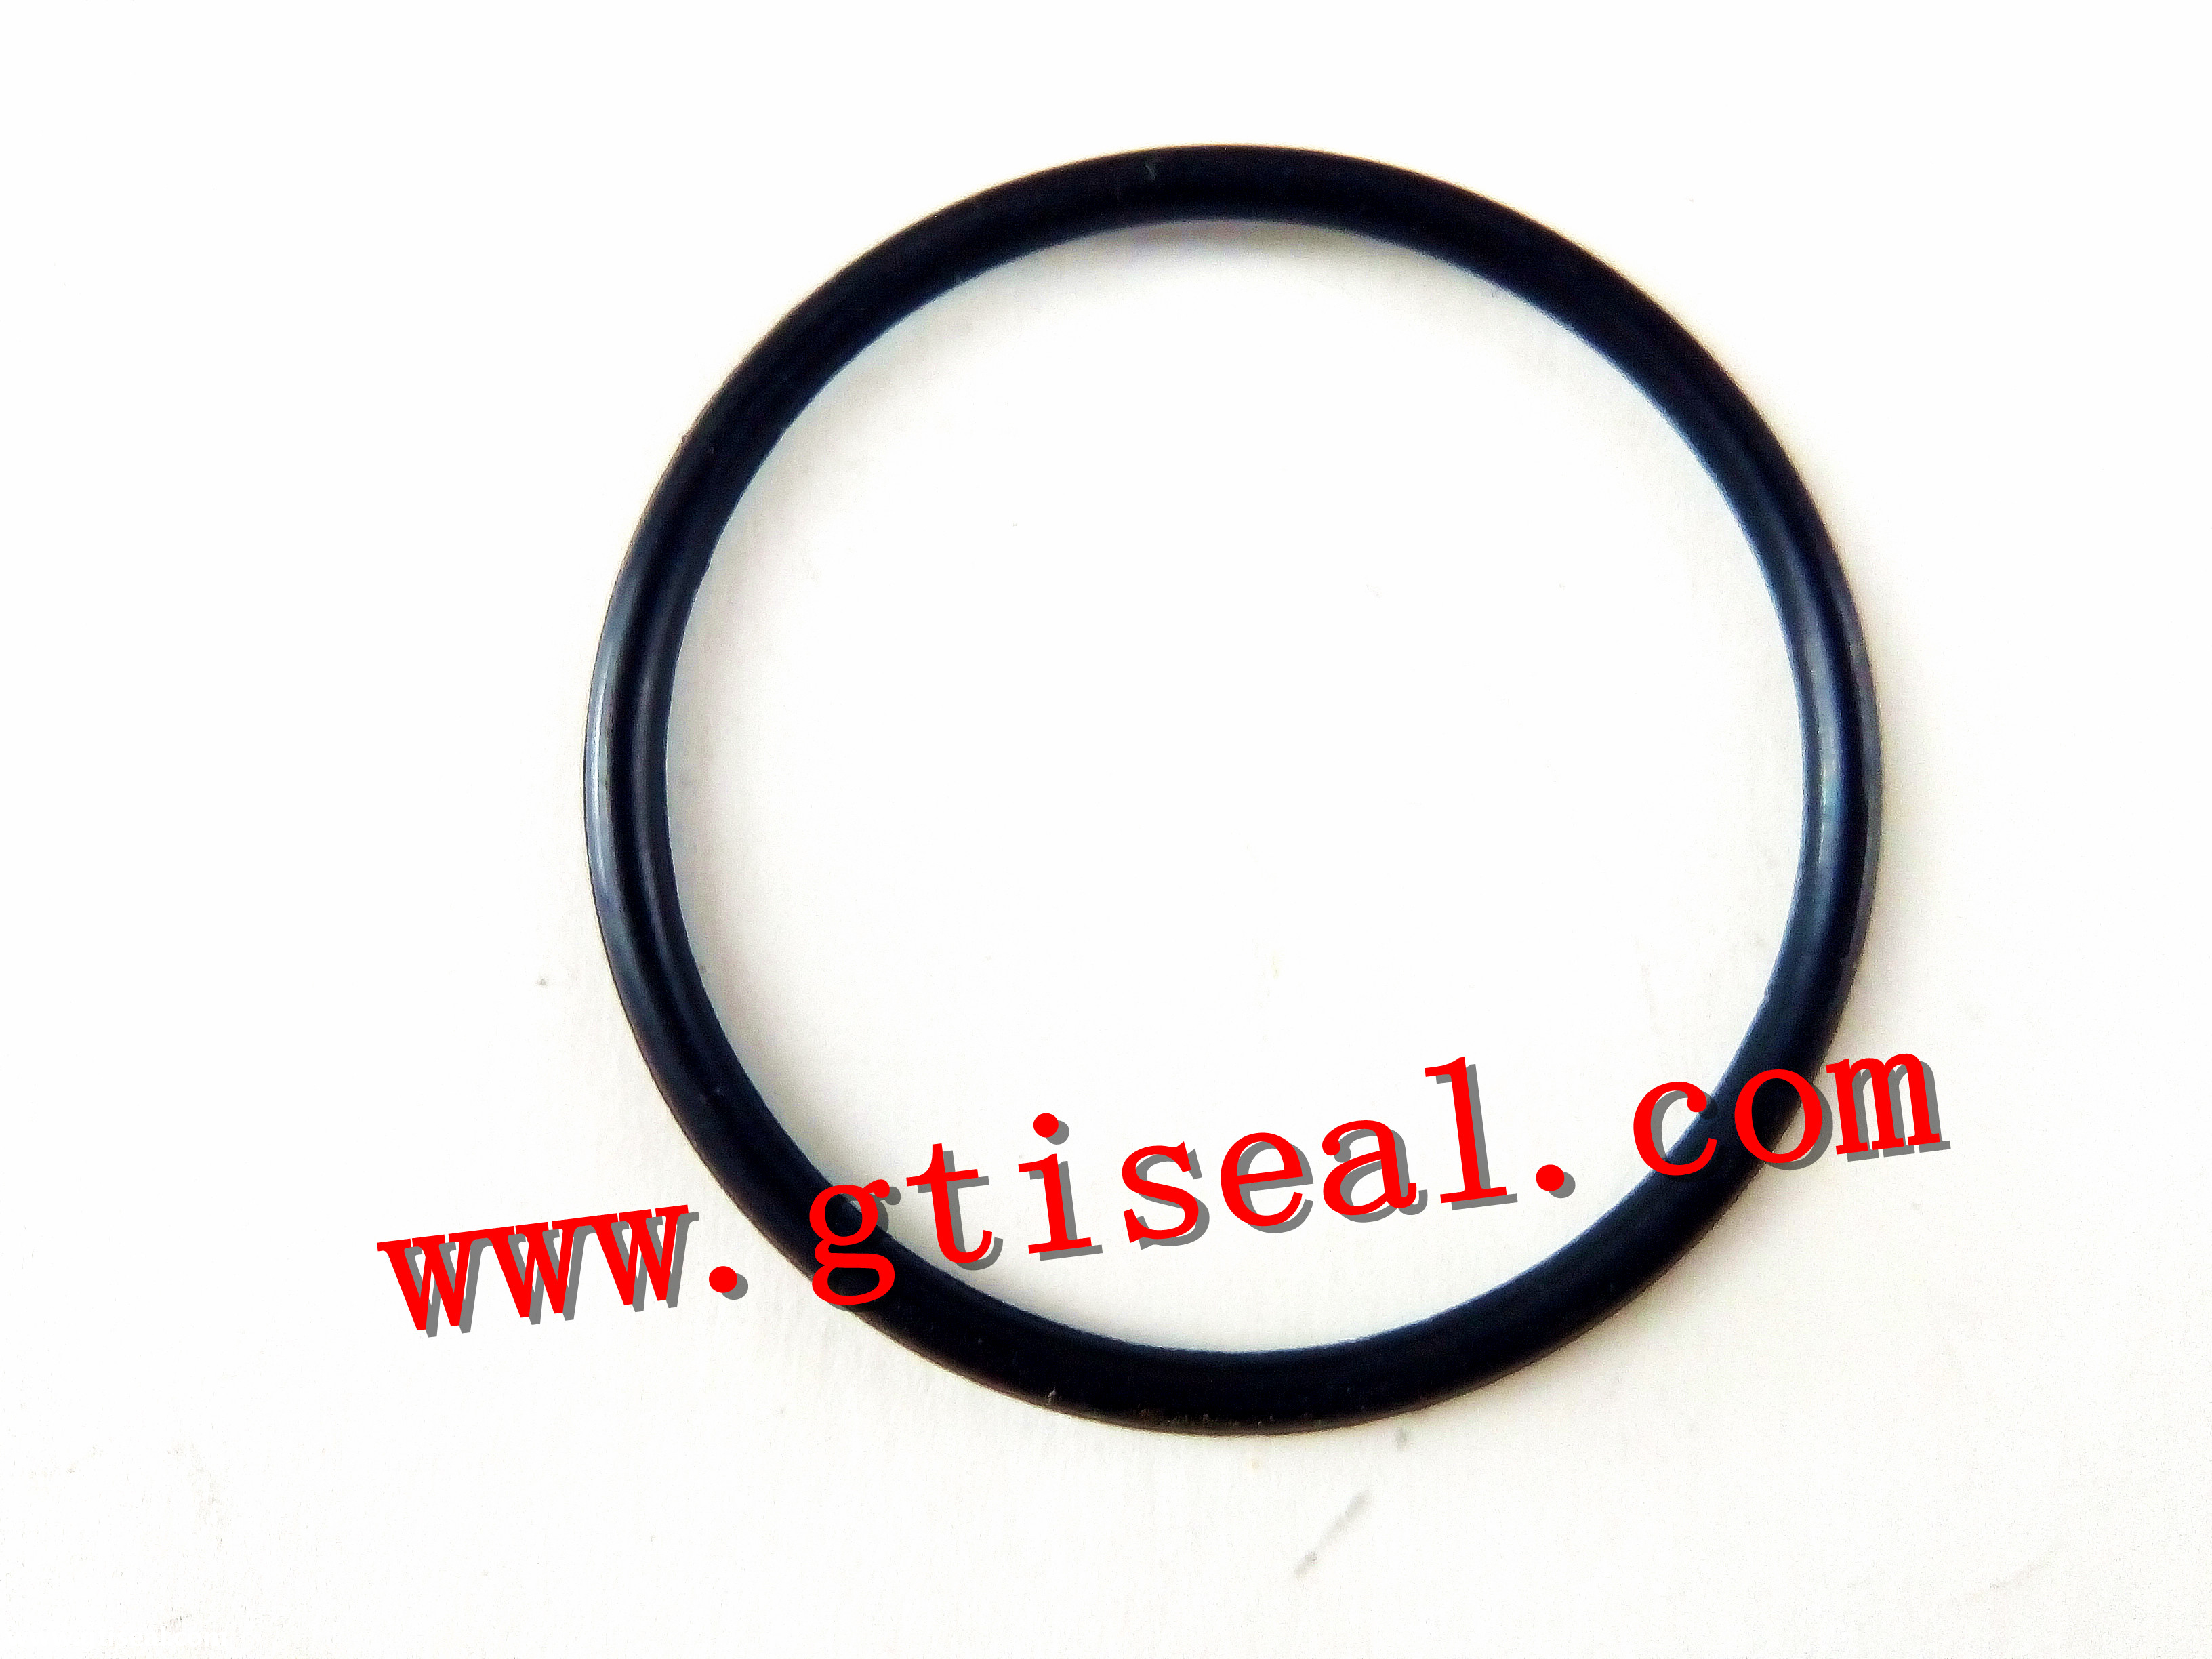  china rubber sealing o ring product supplier